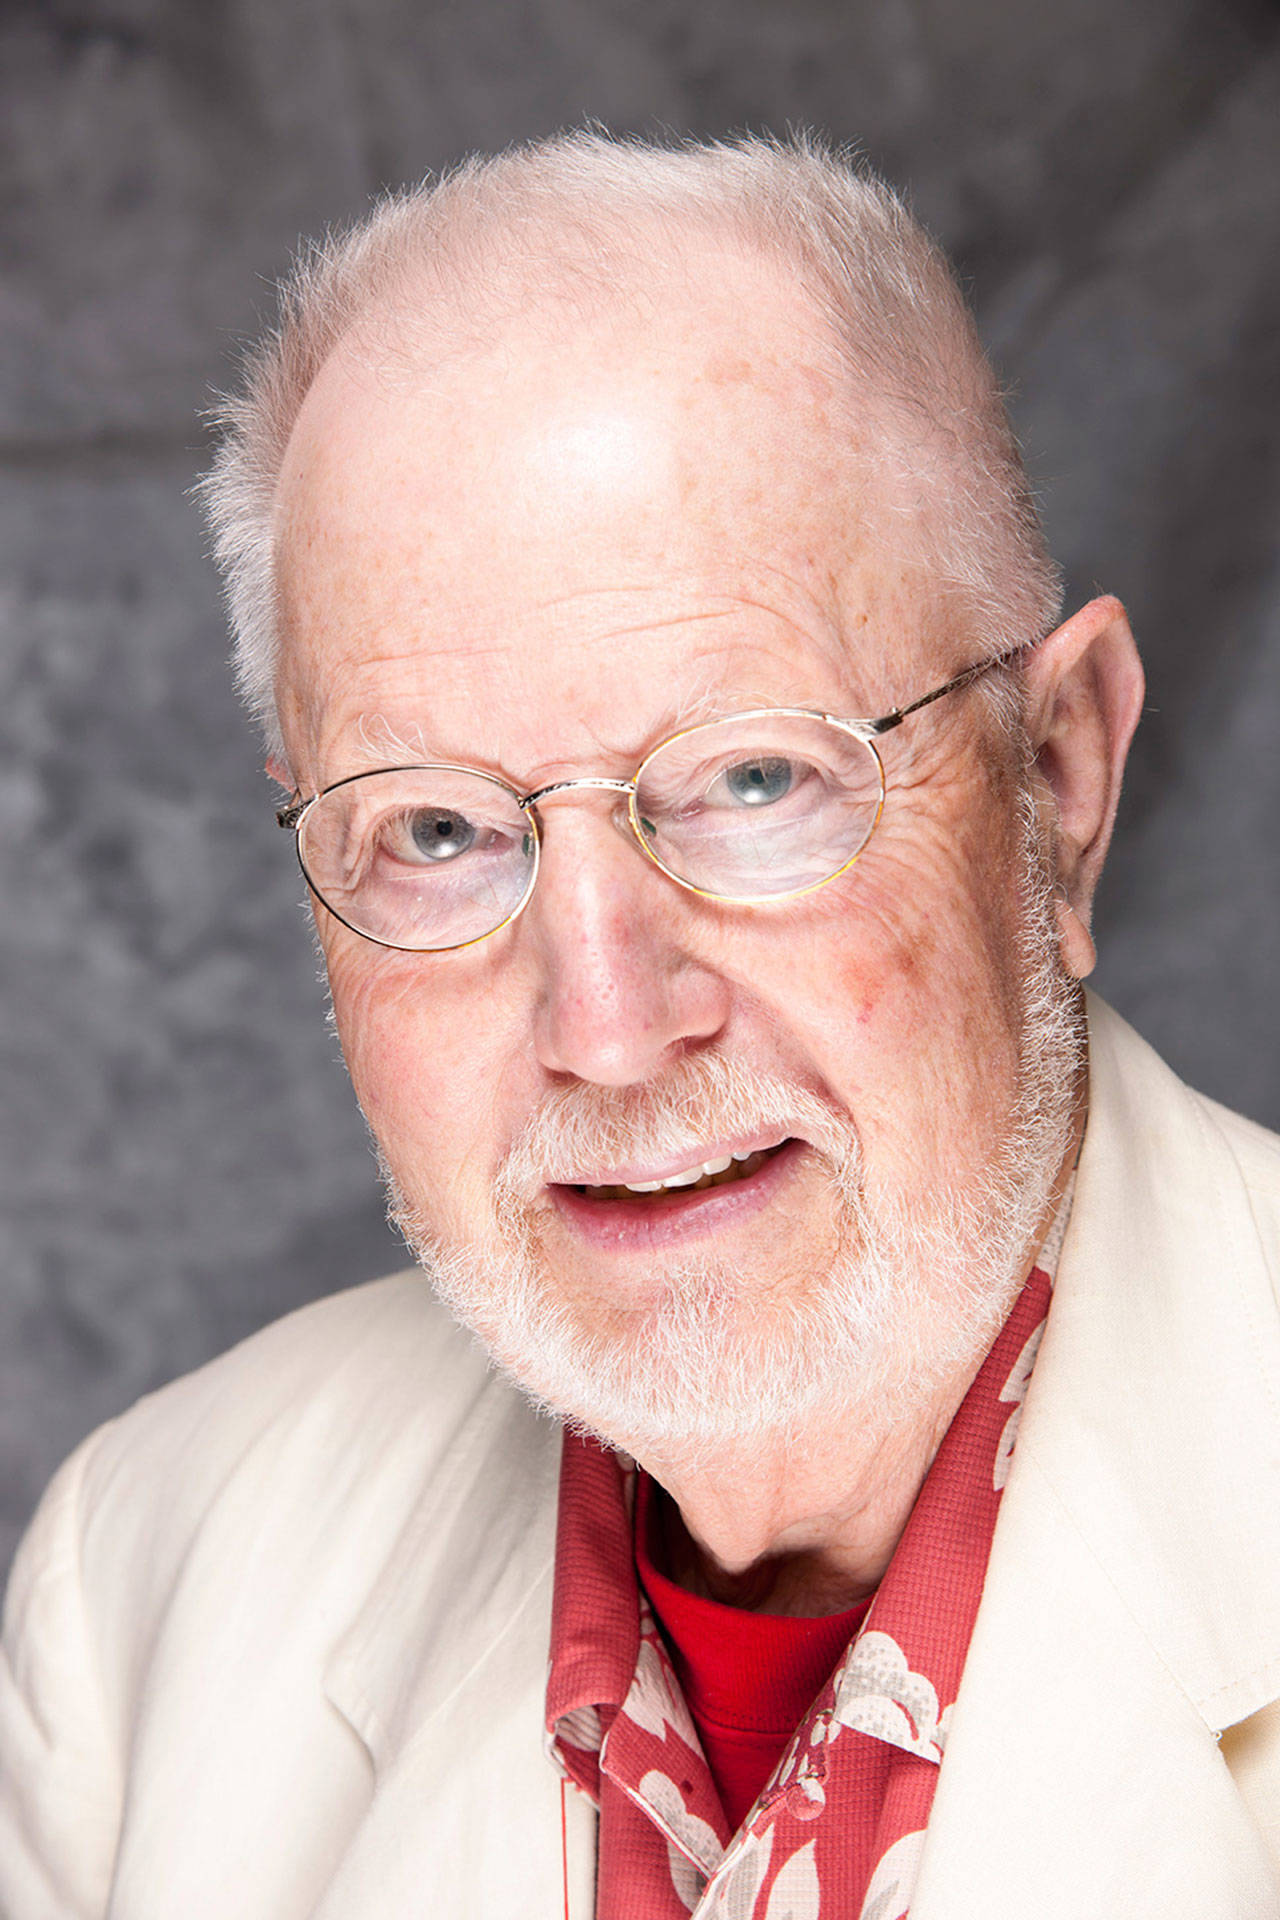 Photo courtesy of Bainbridge Performing Arts | Frank Buxton, iconic Bainbridge Island stage presence and lifetime show biz polymath, reportedly died at 11:45 a.m. Tuesday, Jan. 2, surrounded by family and friends. He was 87.